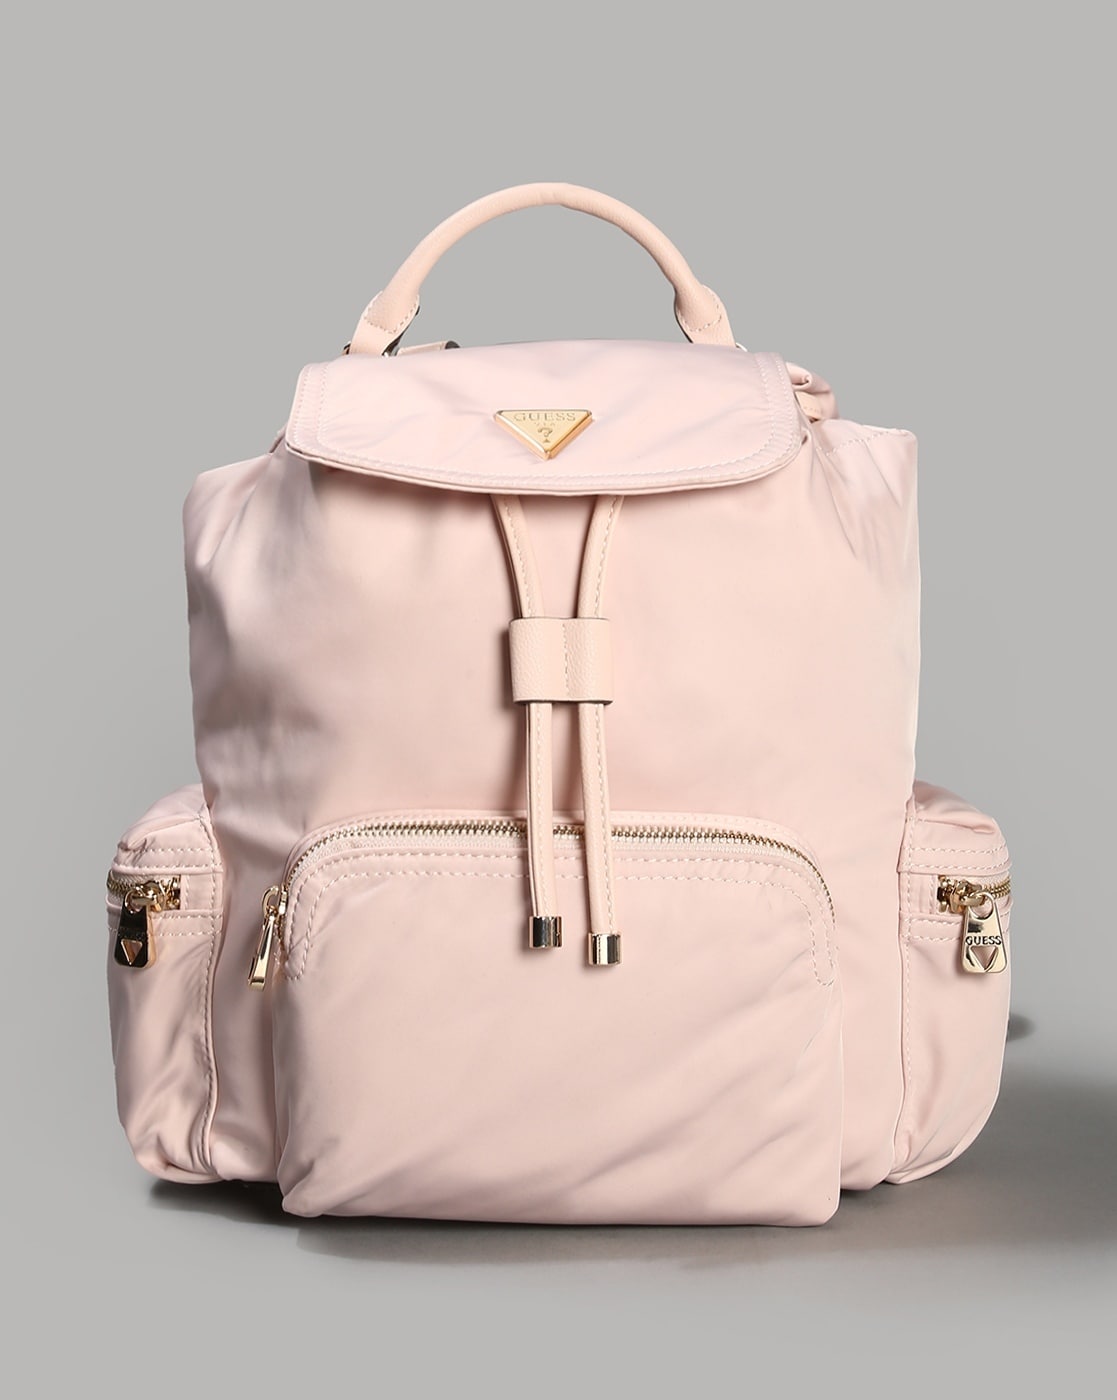 Guess Backpack - Small | Guess backpack, Backpacks, Fashion collectors